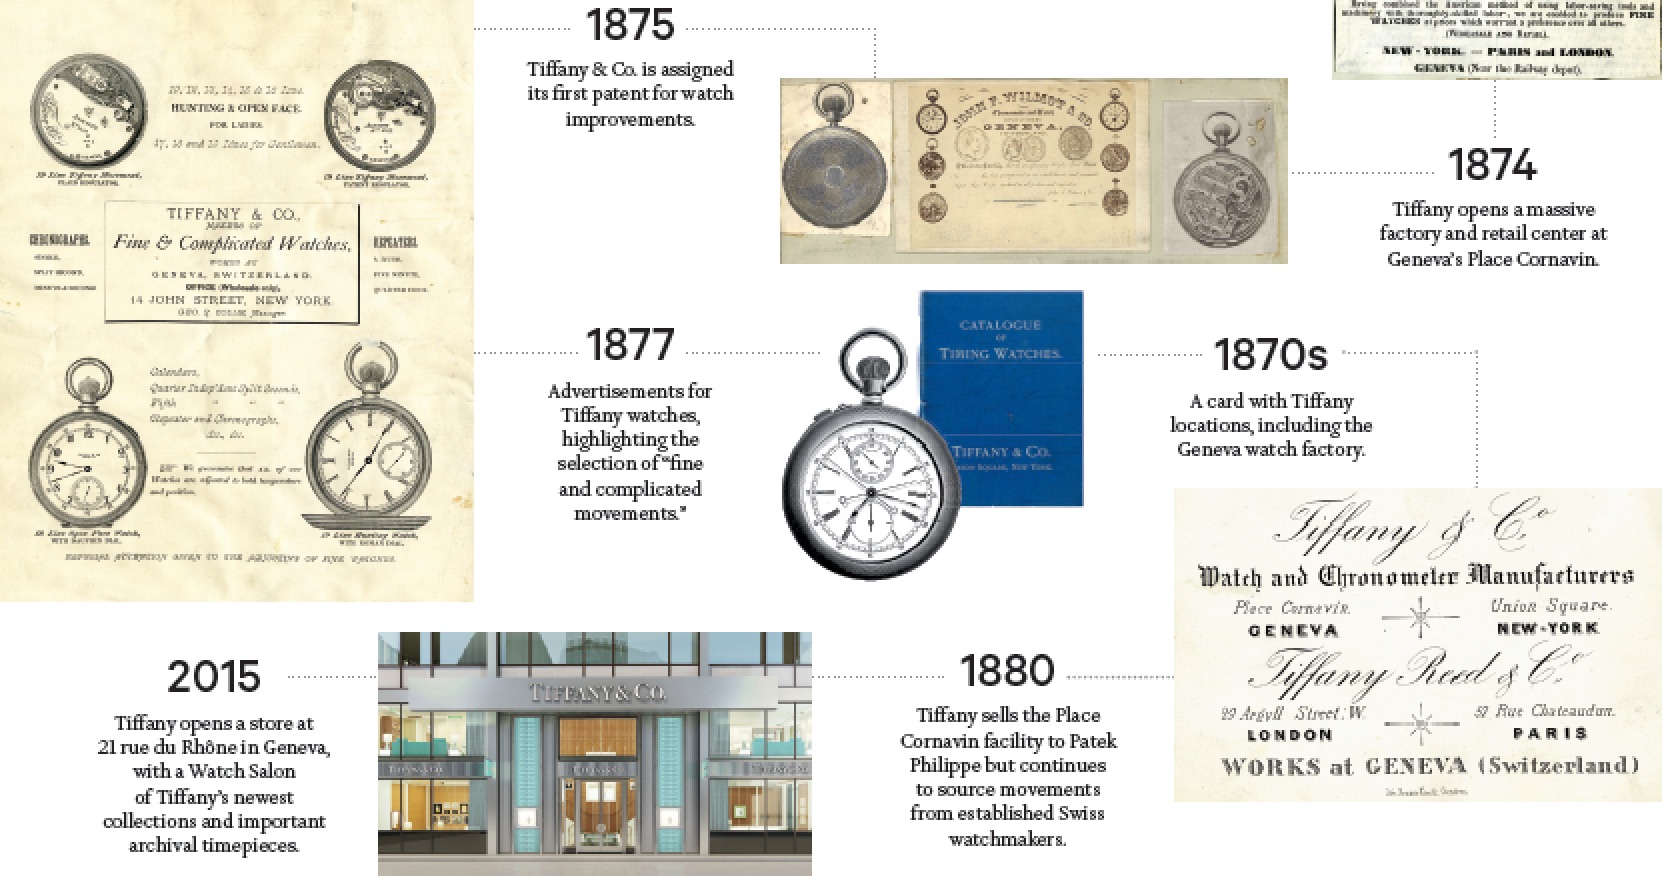 The Tiffany & Co. Timeline